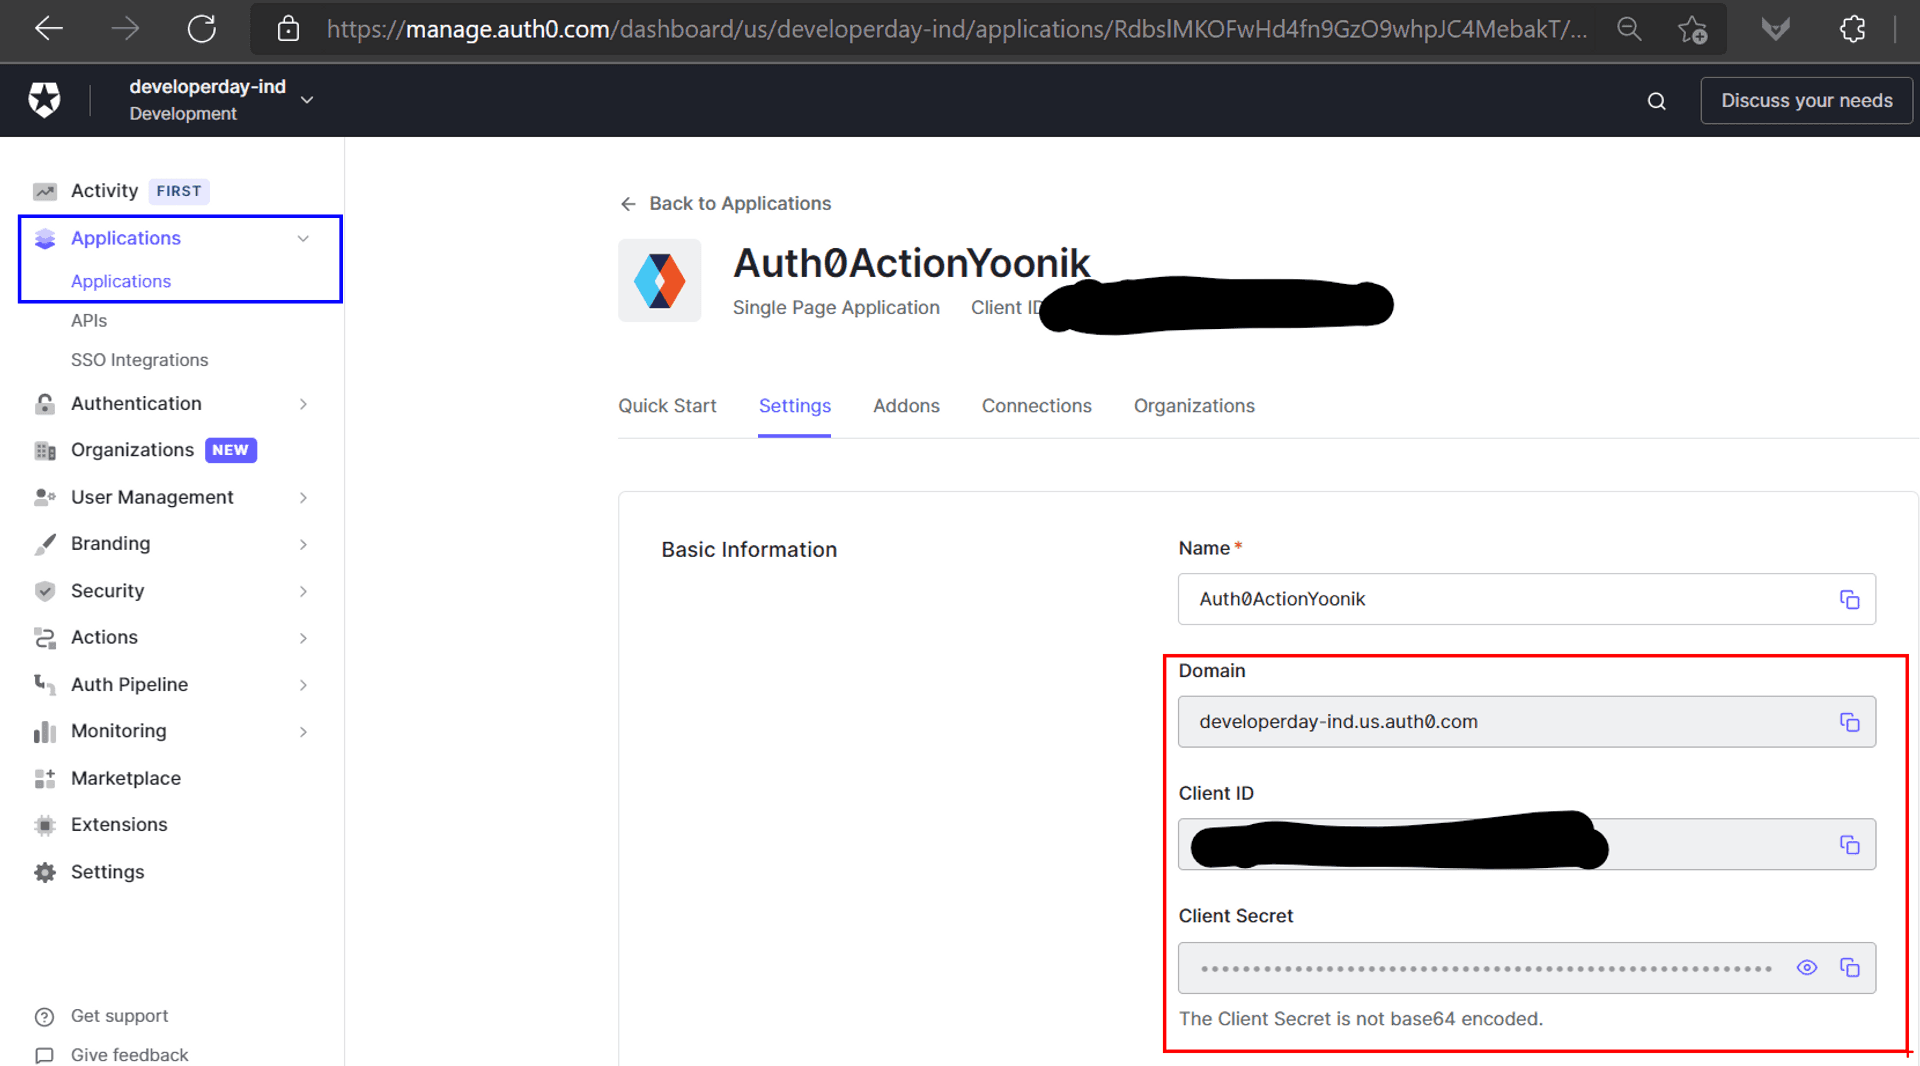 The Auth0 Application Details page with the Client ID and Client Secret information redacted